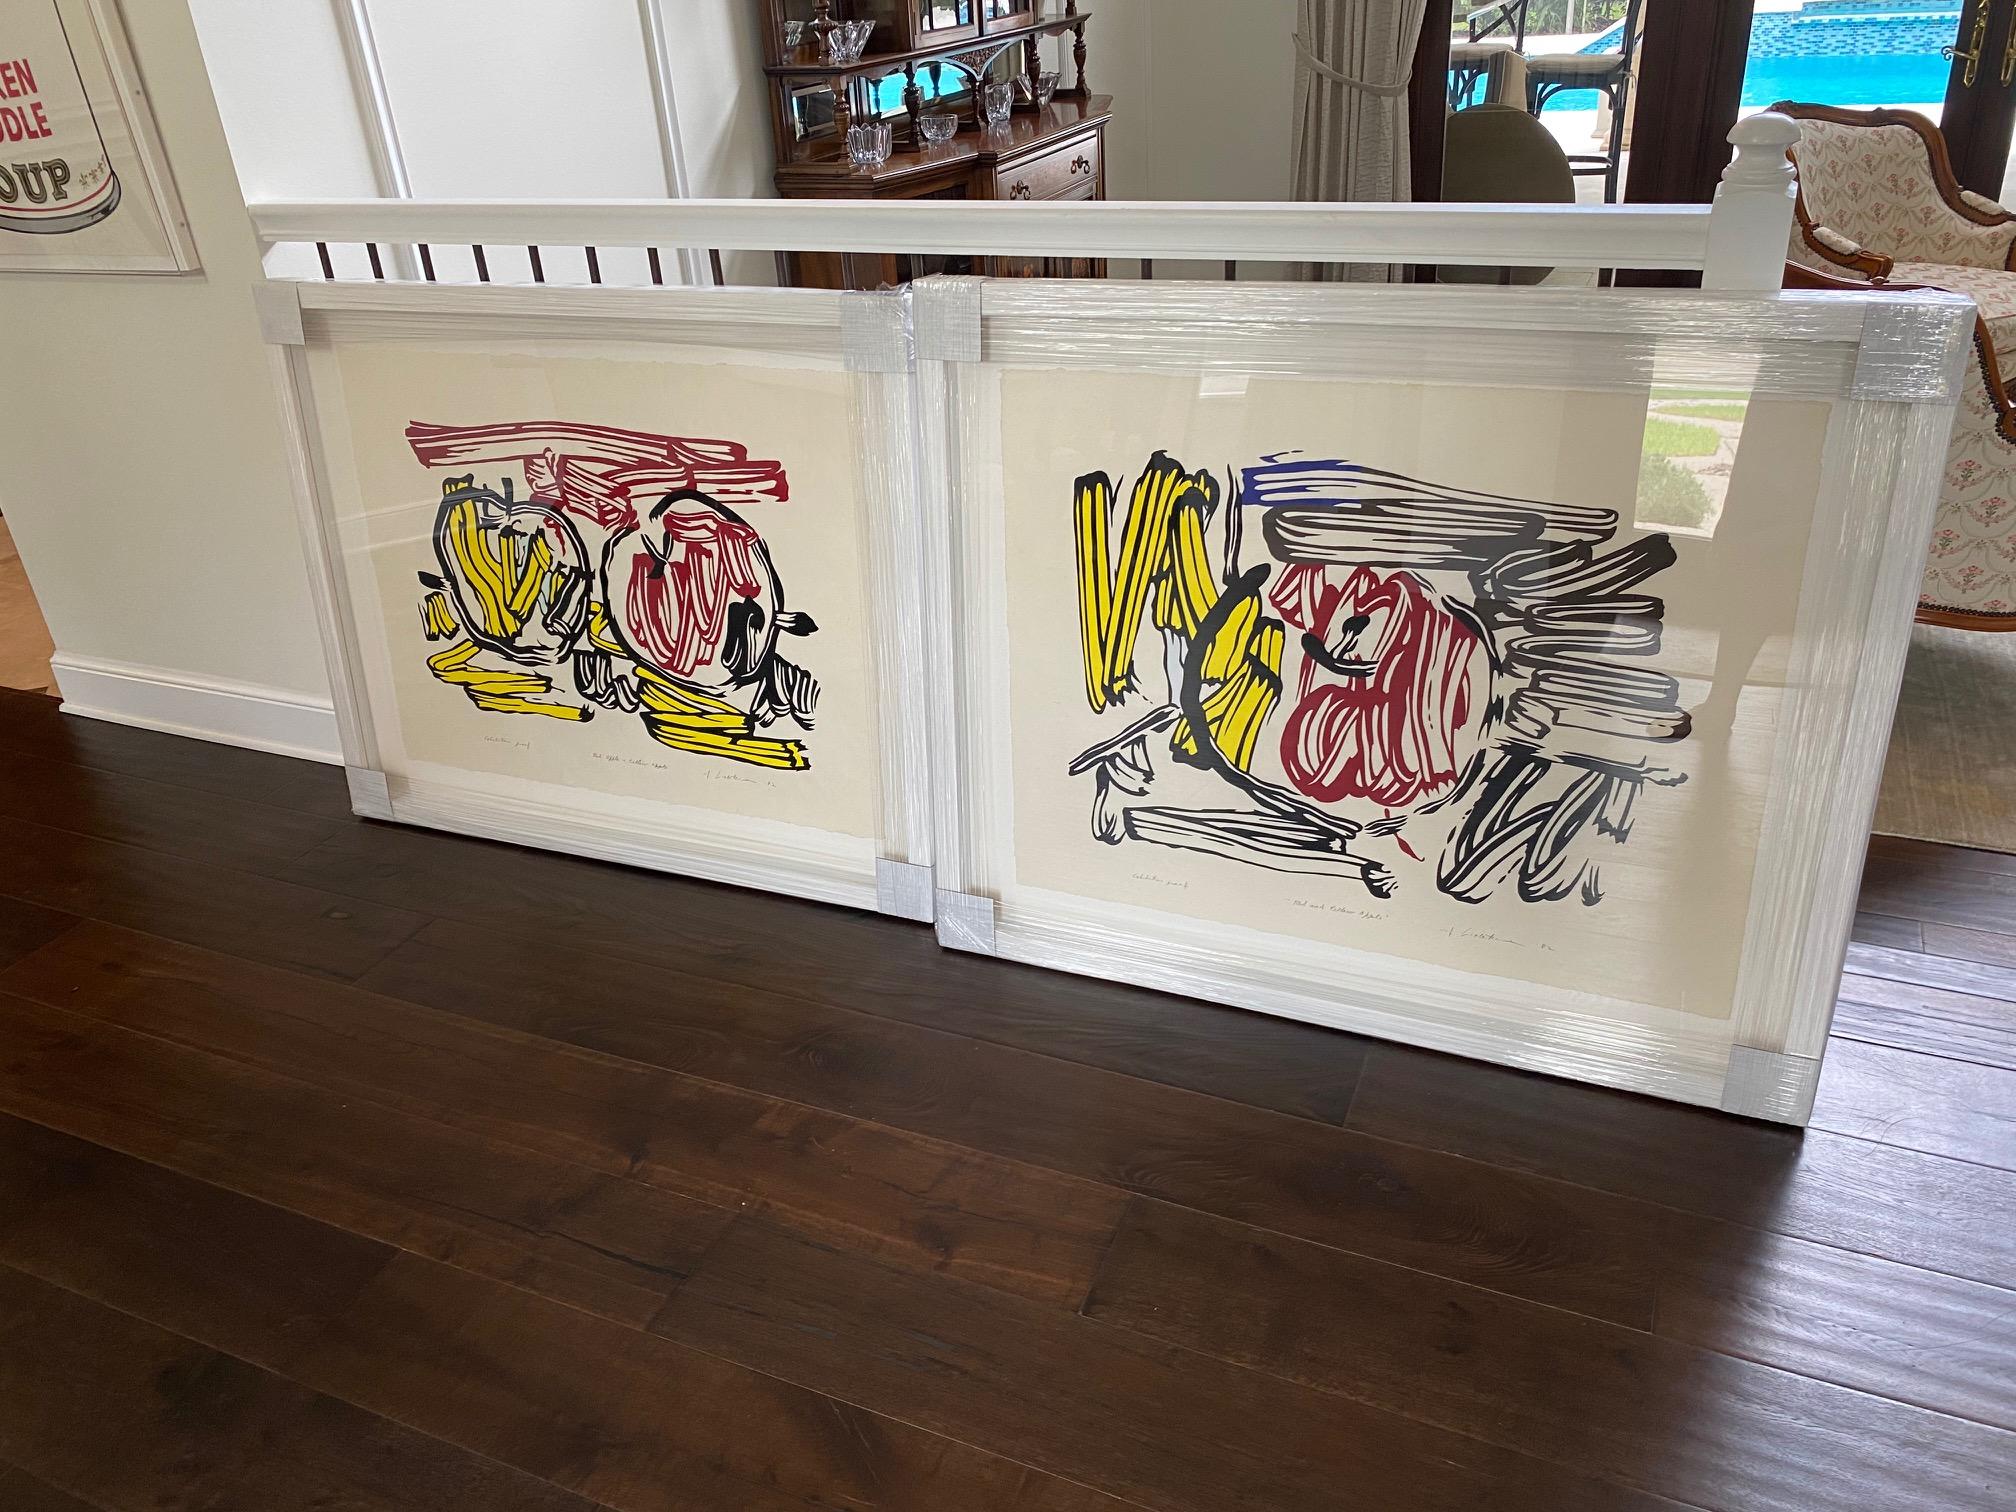 Red Apple and Yellow Apple, Exhibition Proof - Print by Roy Lichtenstein